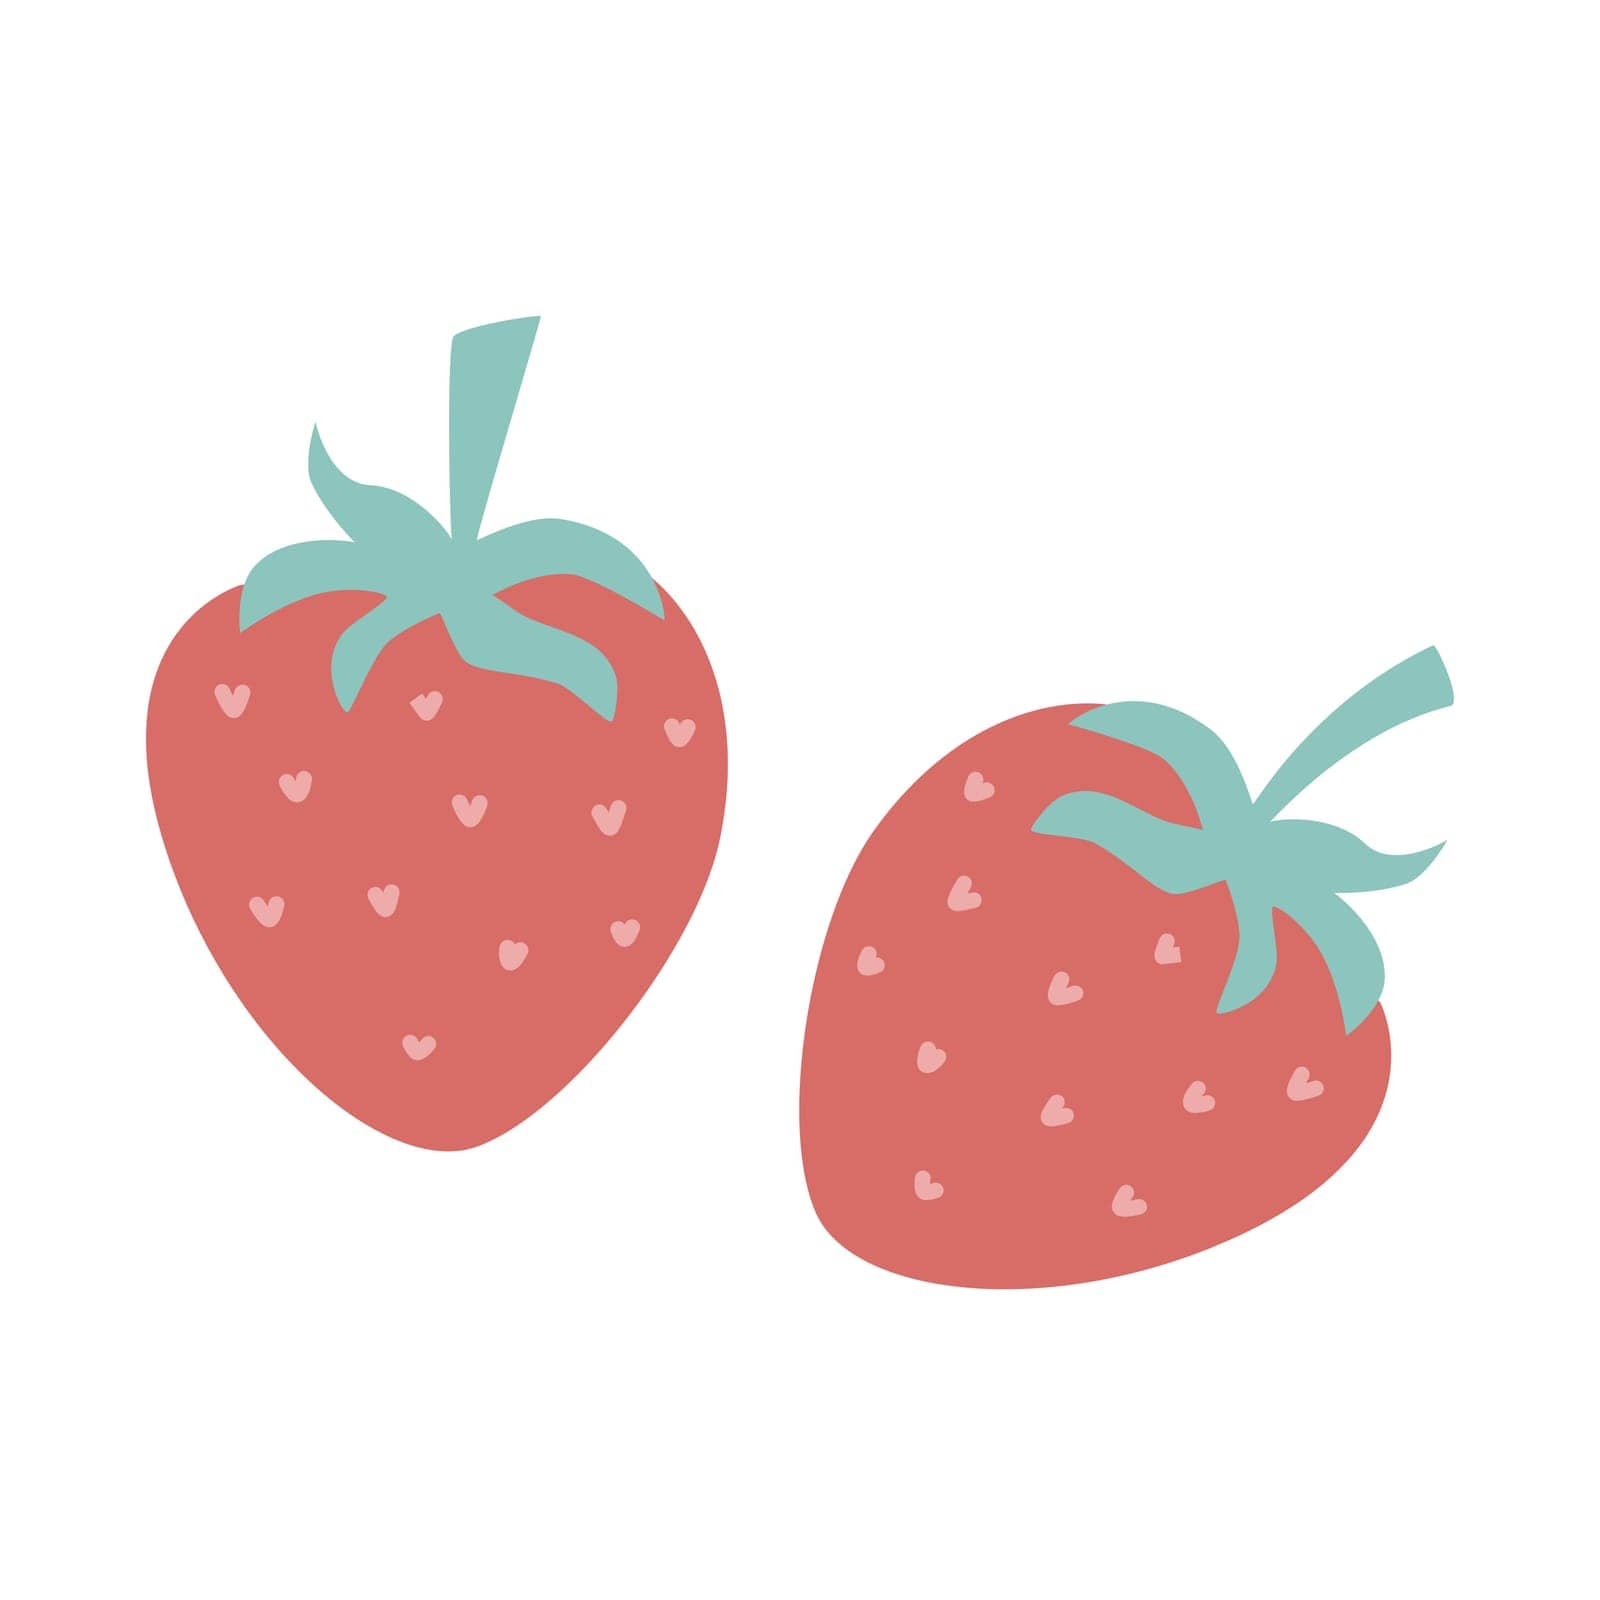 Ripe strawberry clip art. Garden juicy red berries, hand drawn isolated vector illustration